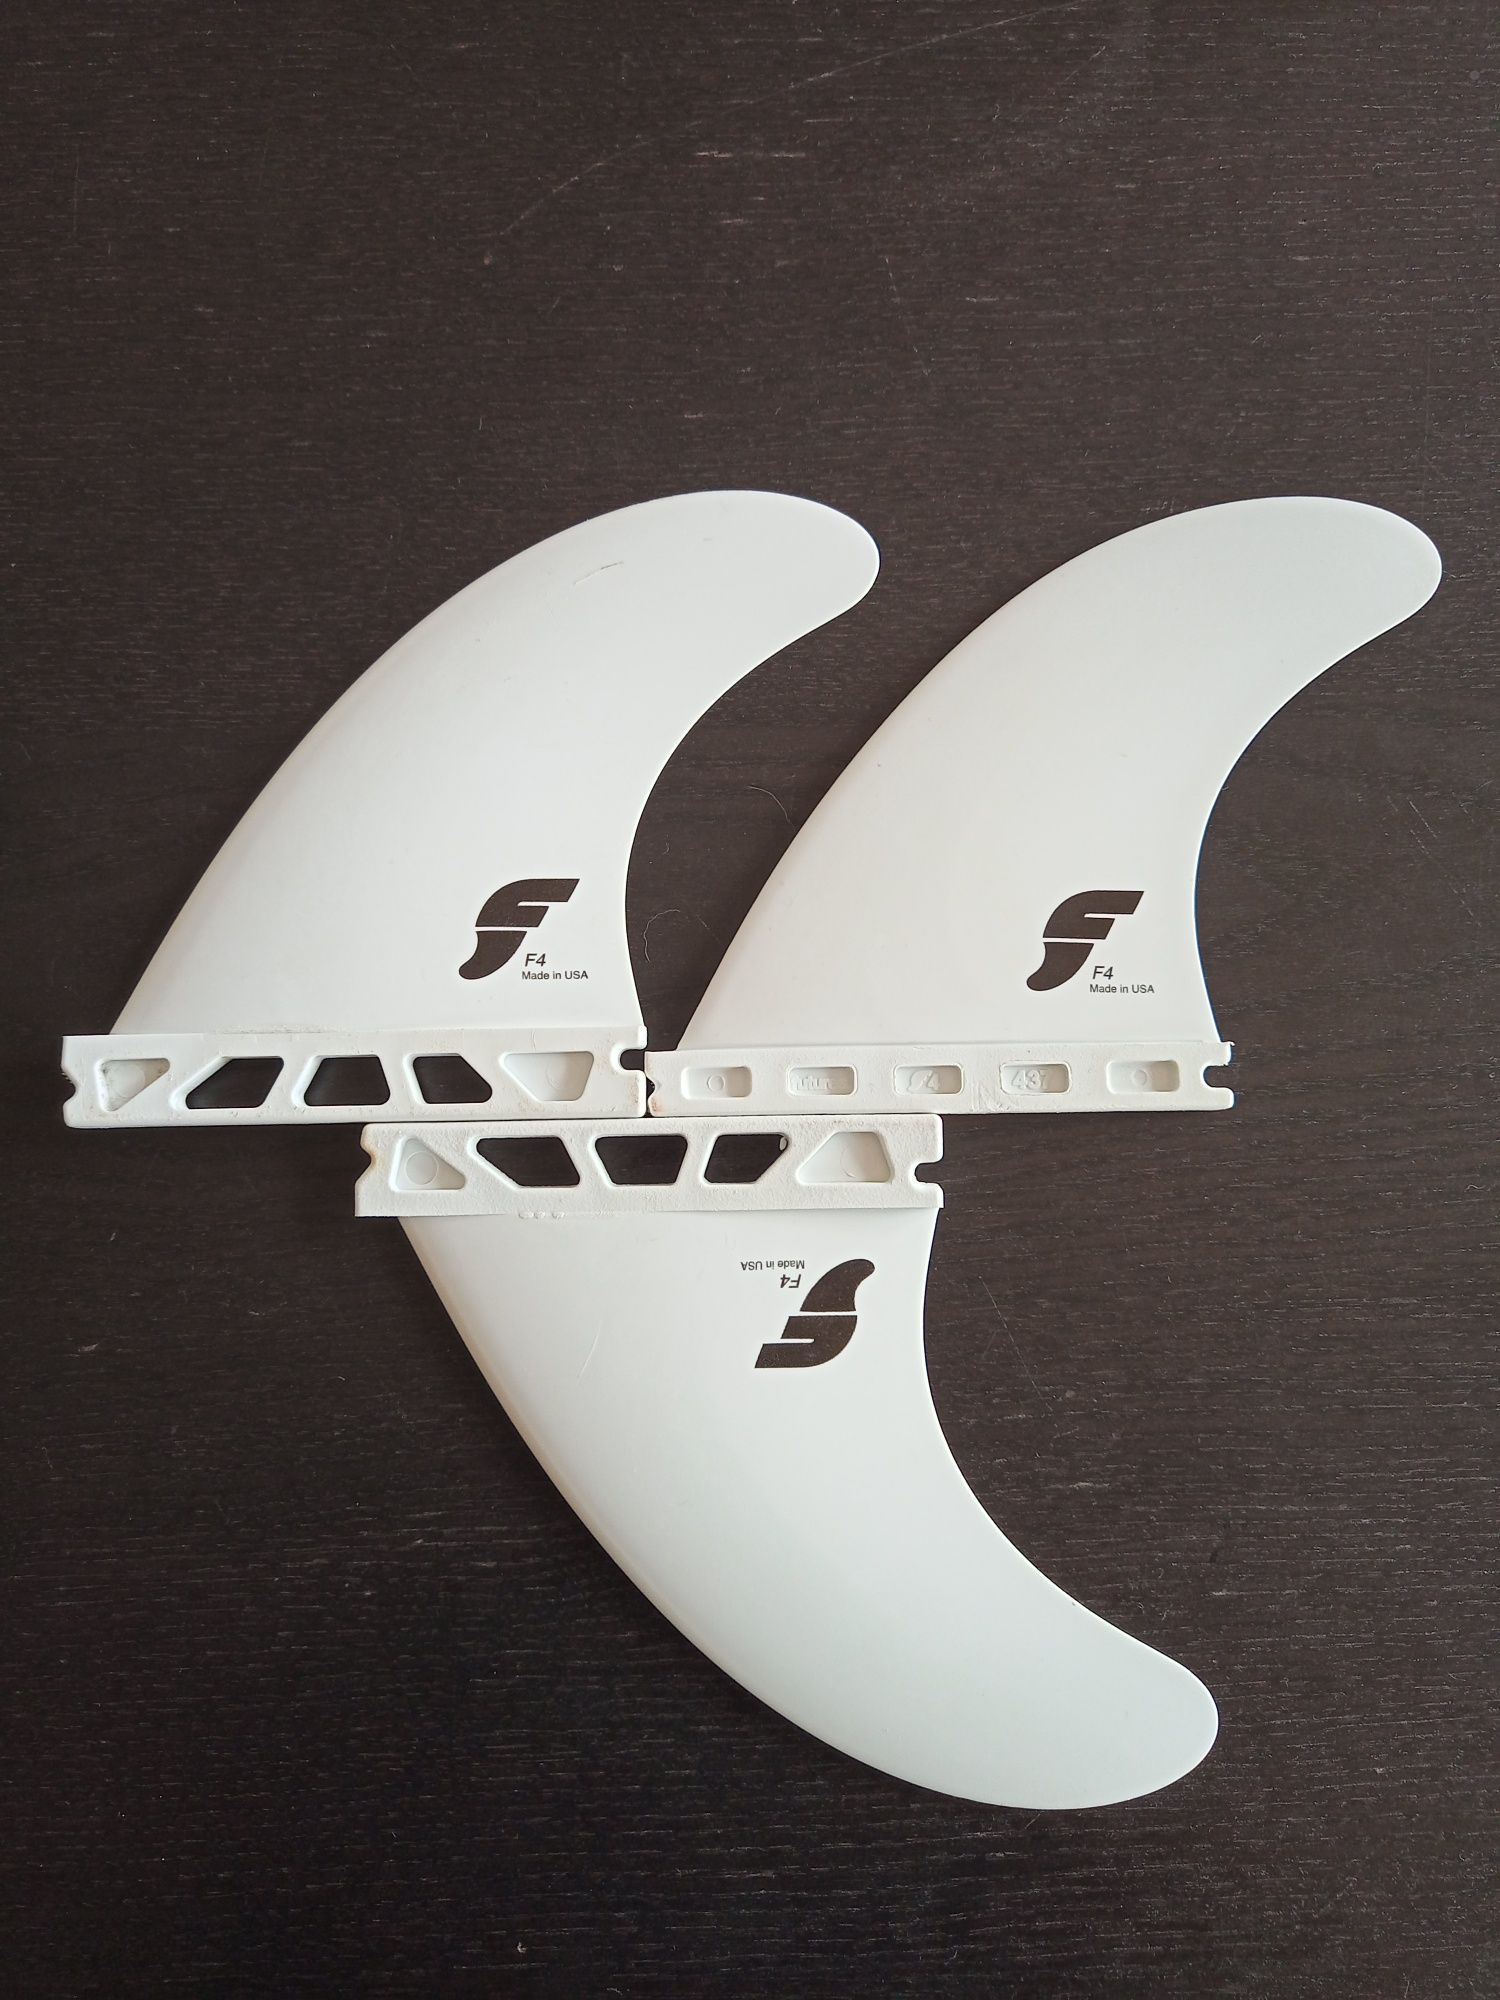 Futures Fins F4 (Made in USA)